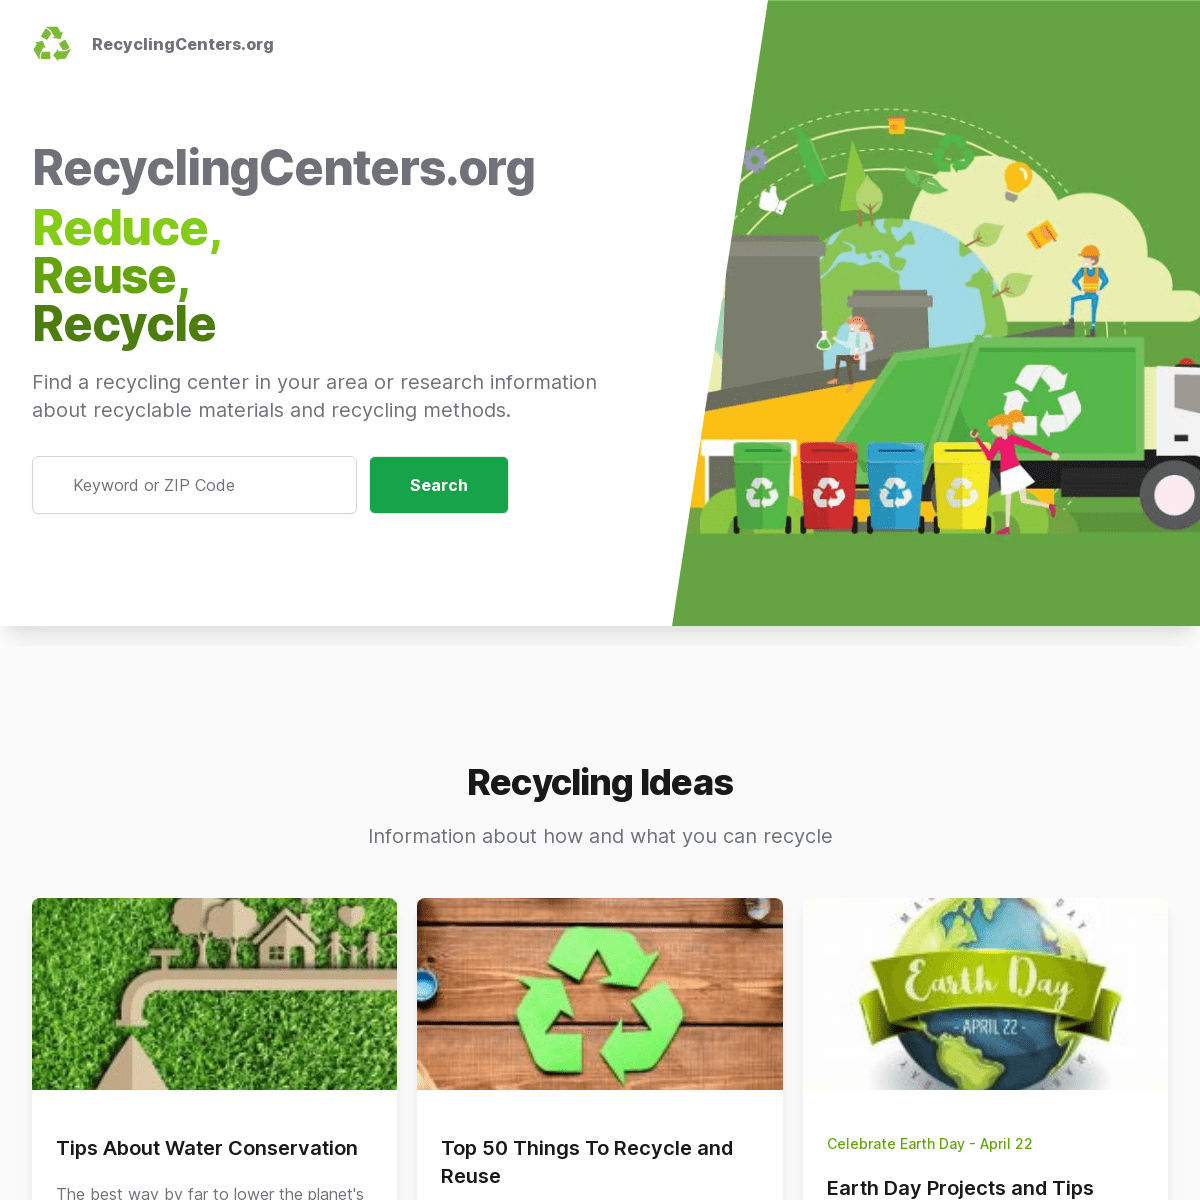 A complete backup of https://recyclingcenters.org